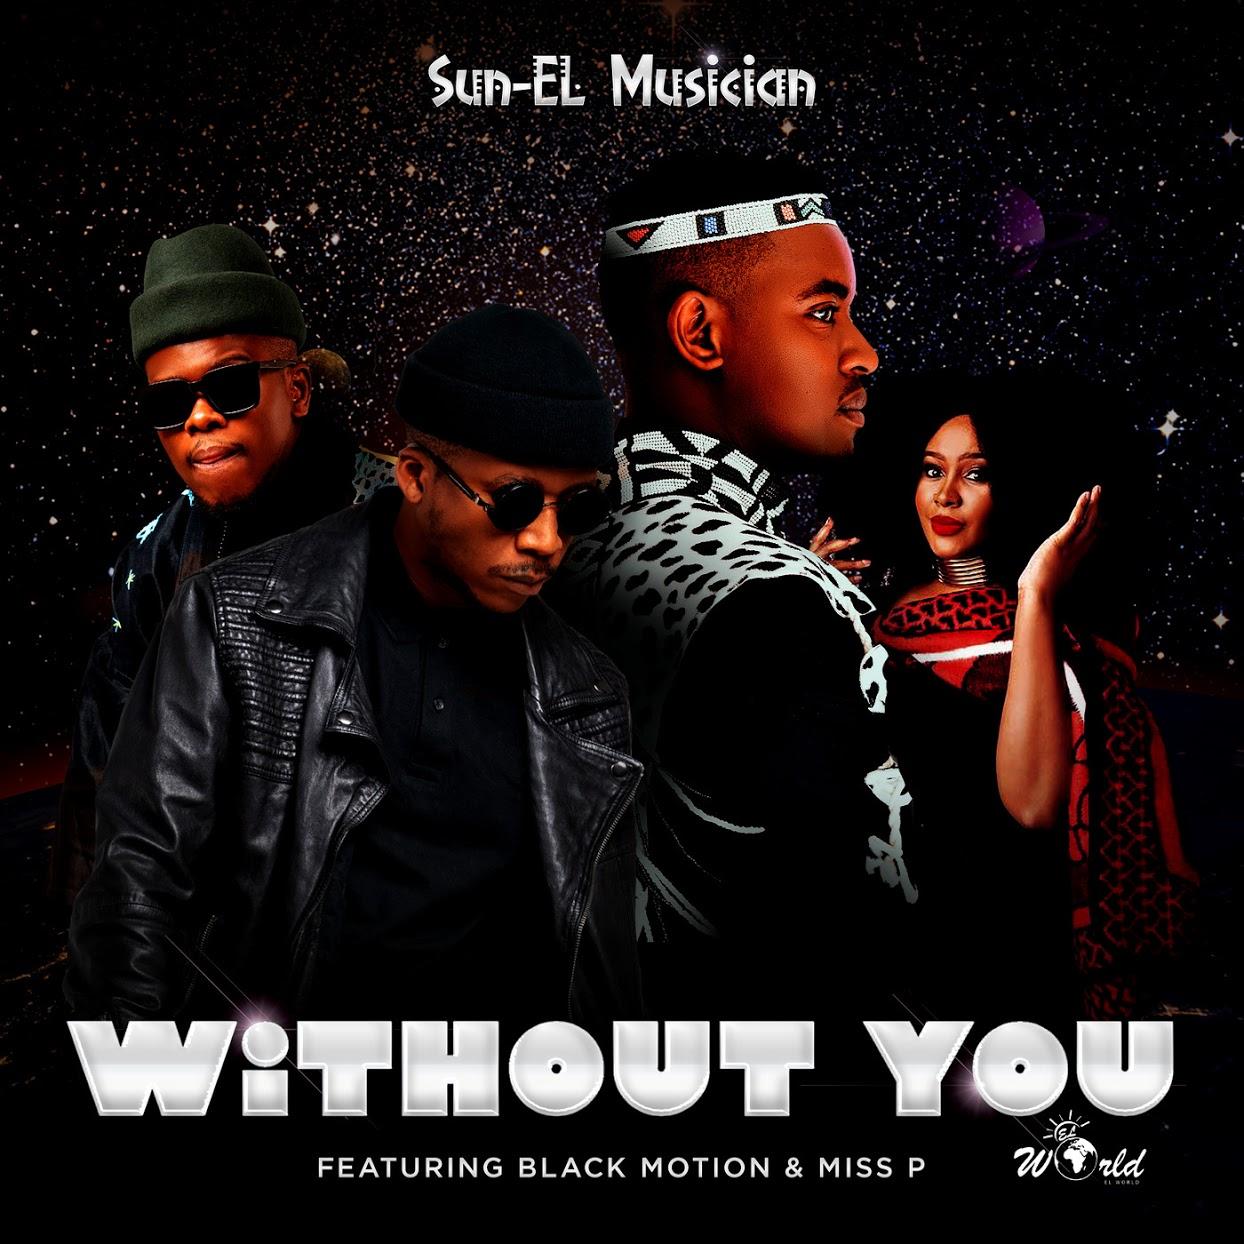 Sun-EL Musician - Without You (feat. Black Motion & Miss P)